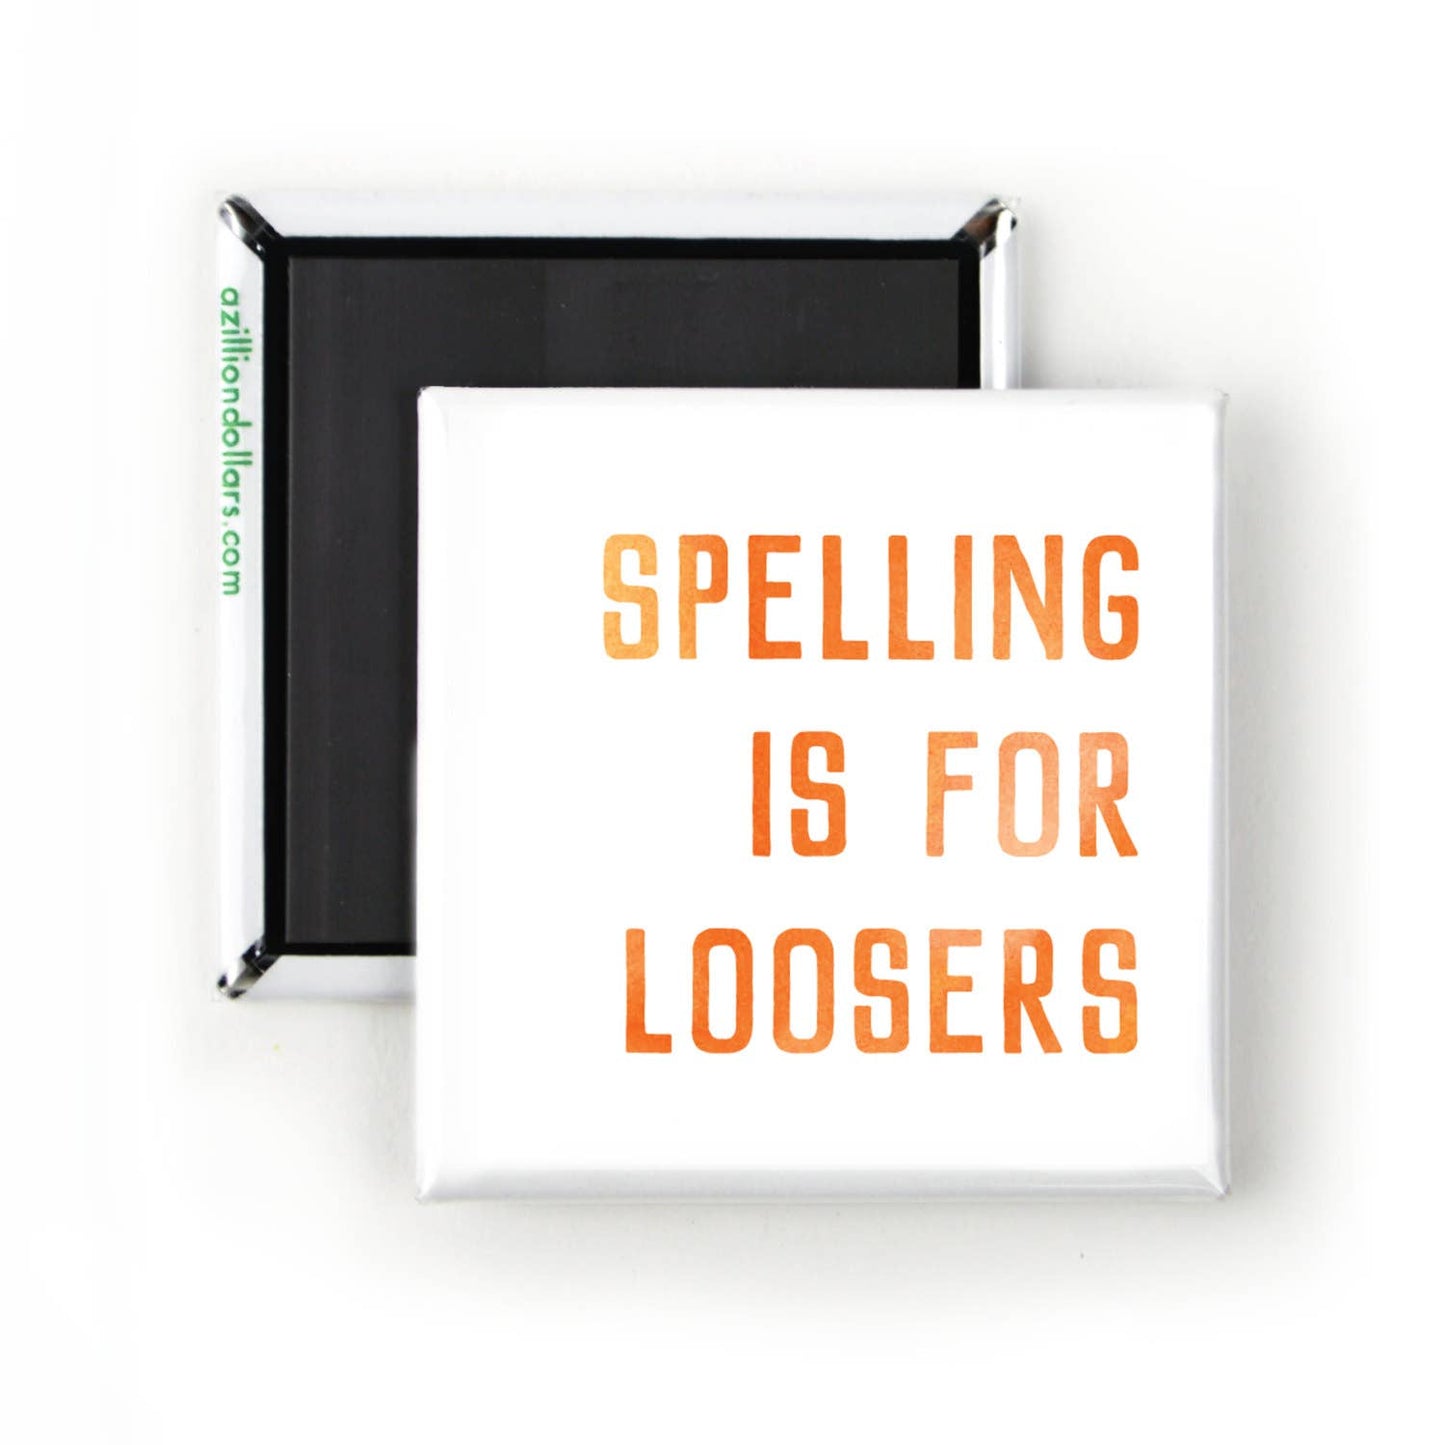 Spelling is For Loosers Funny Handmade Magnet | 2" x 2" Square Mini Size